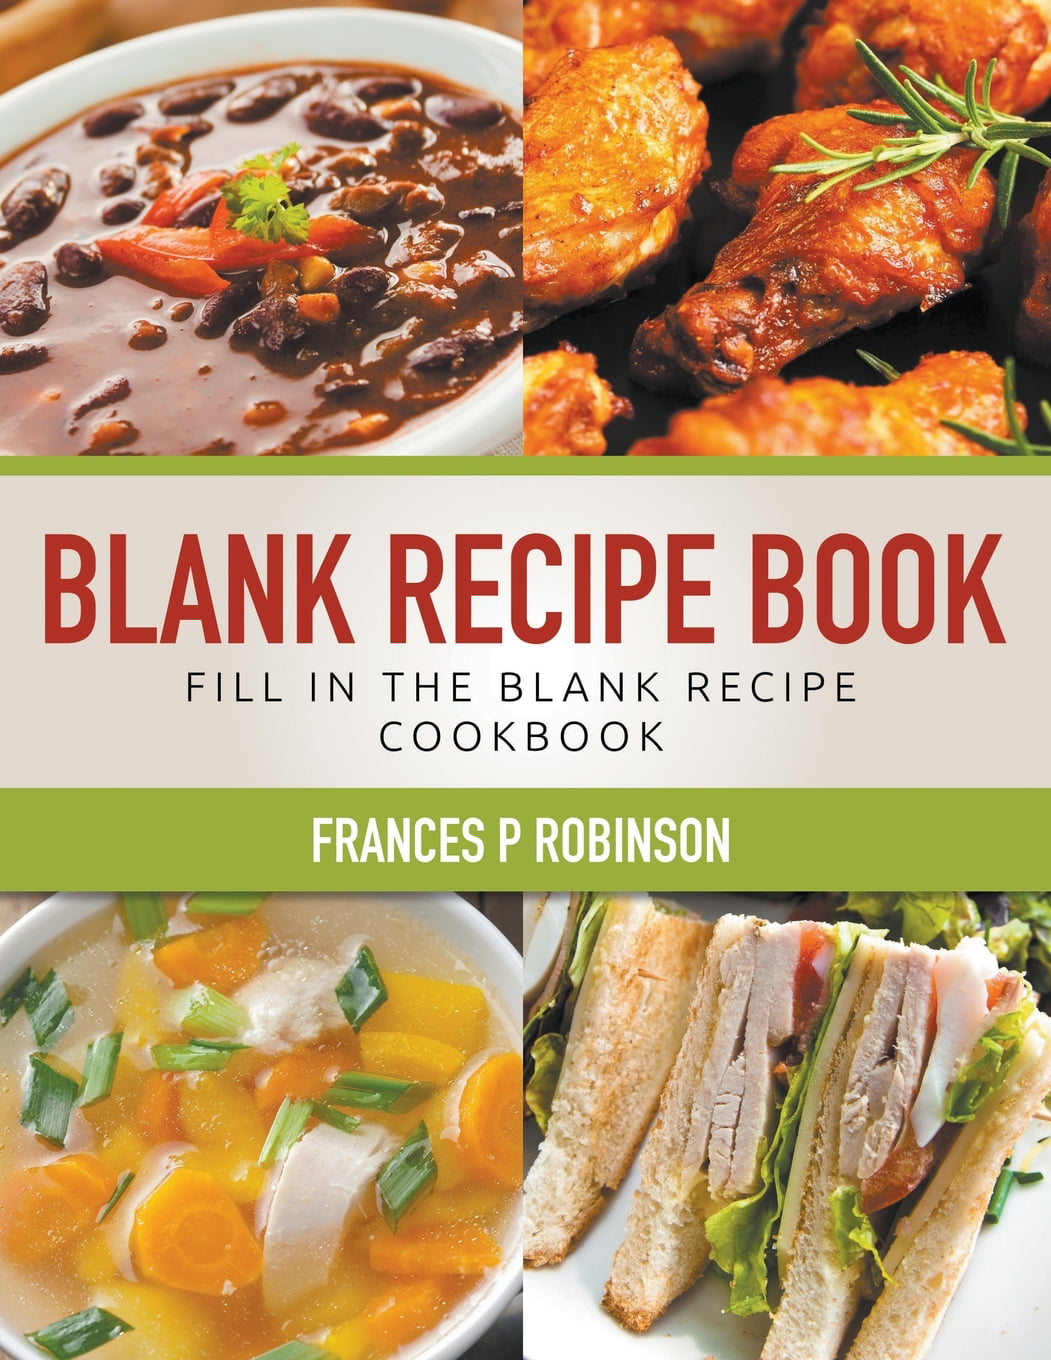 Blank Recipe Book to Write in Your Own Recipes for Men by Hillside